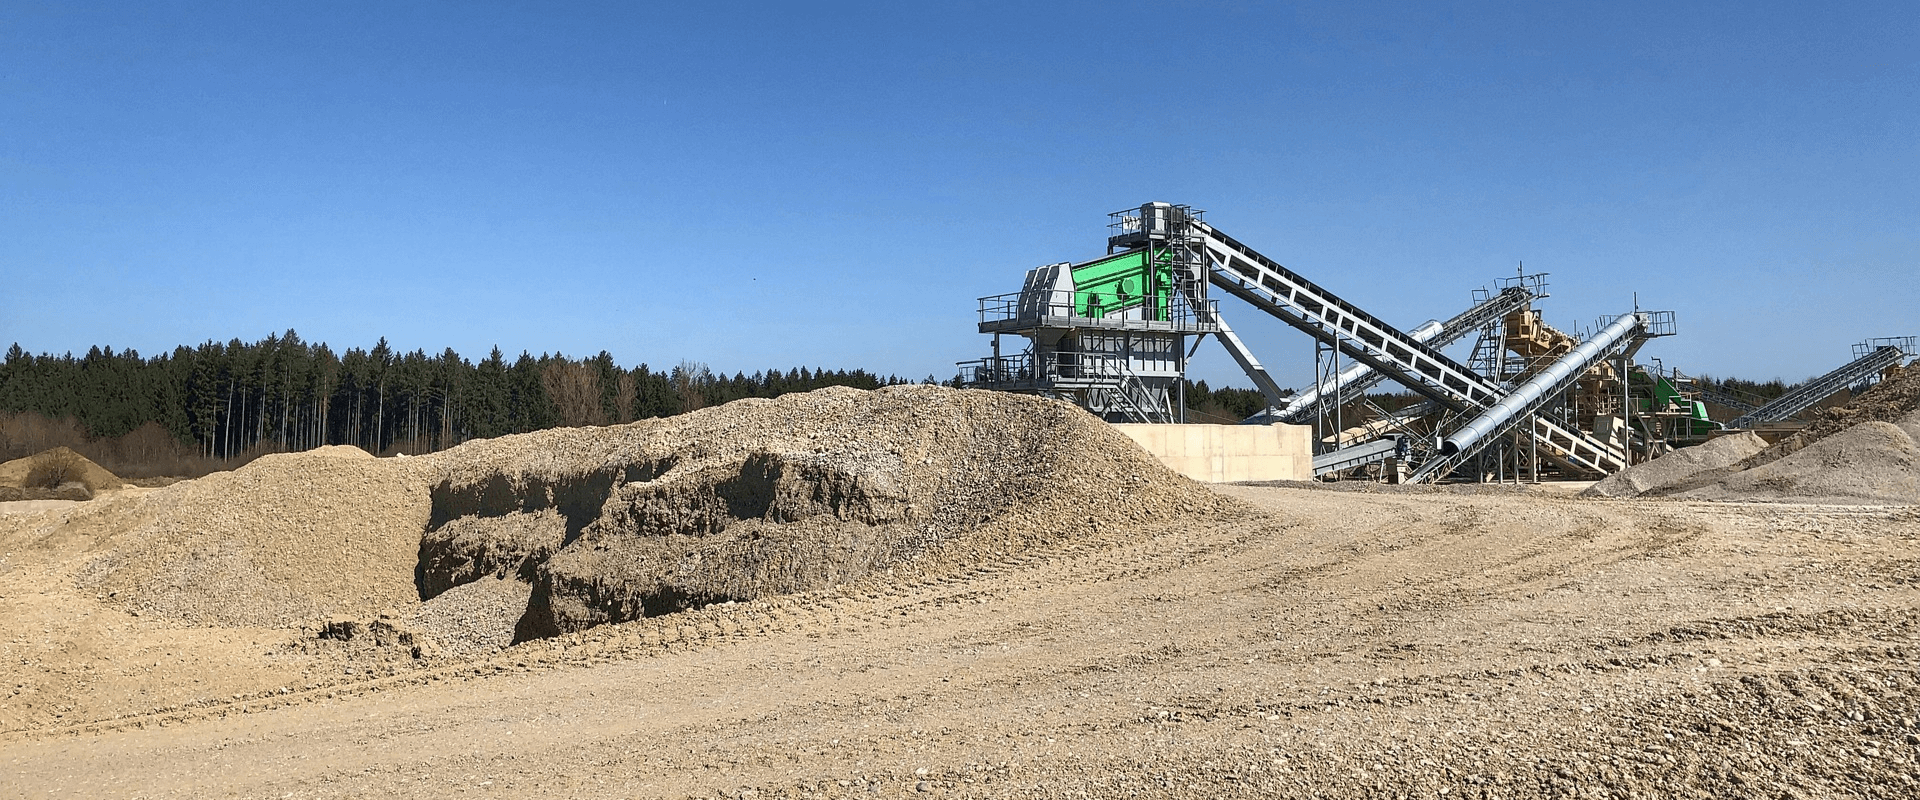 AMP is your Source for Aggregate, Mining & Process Mill Equipment.